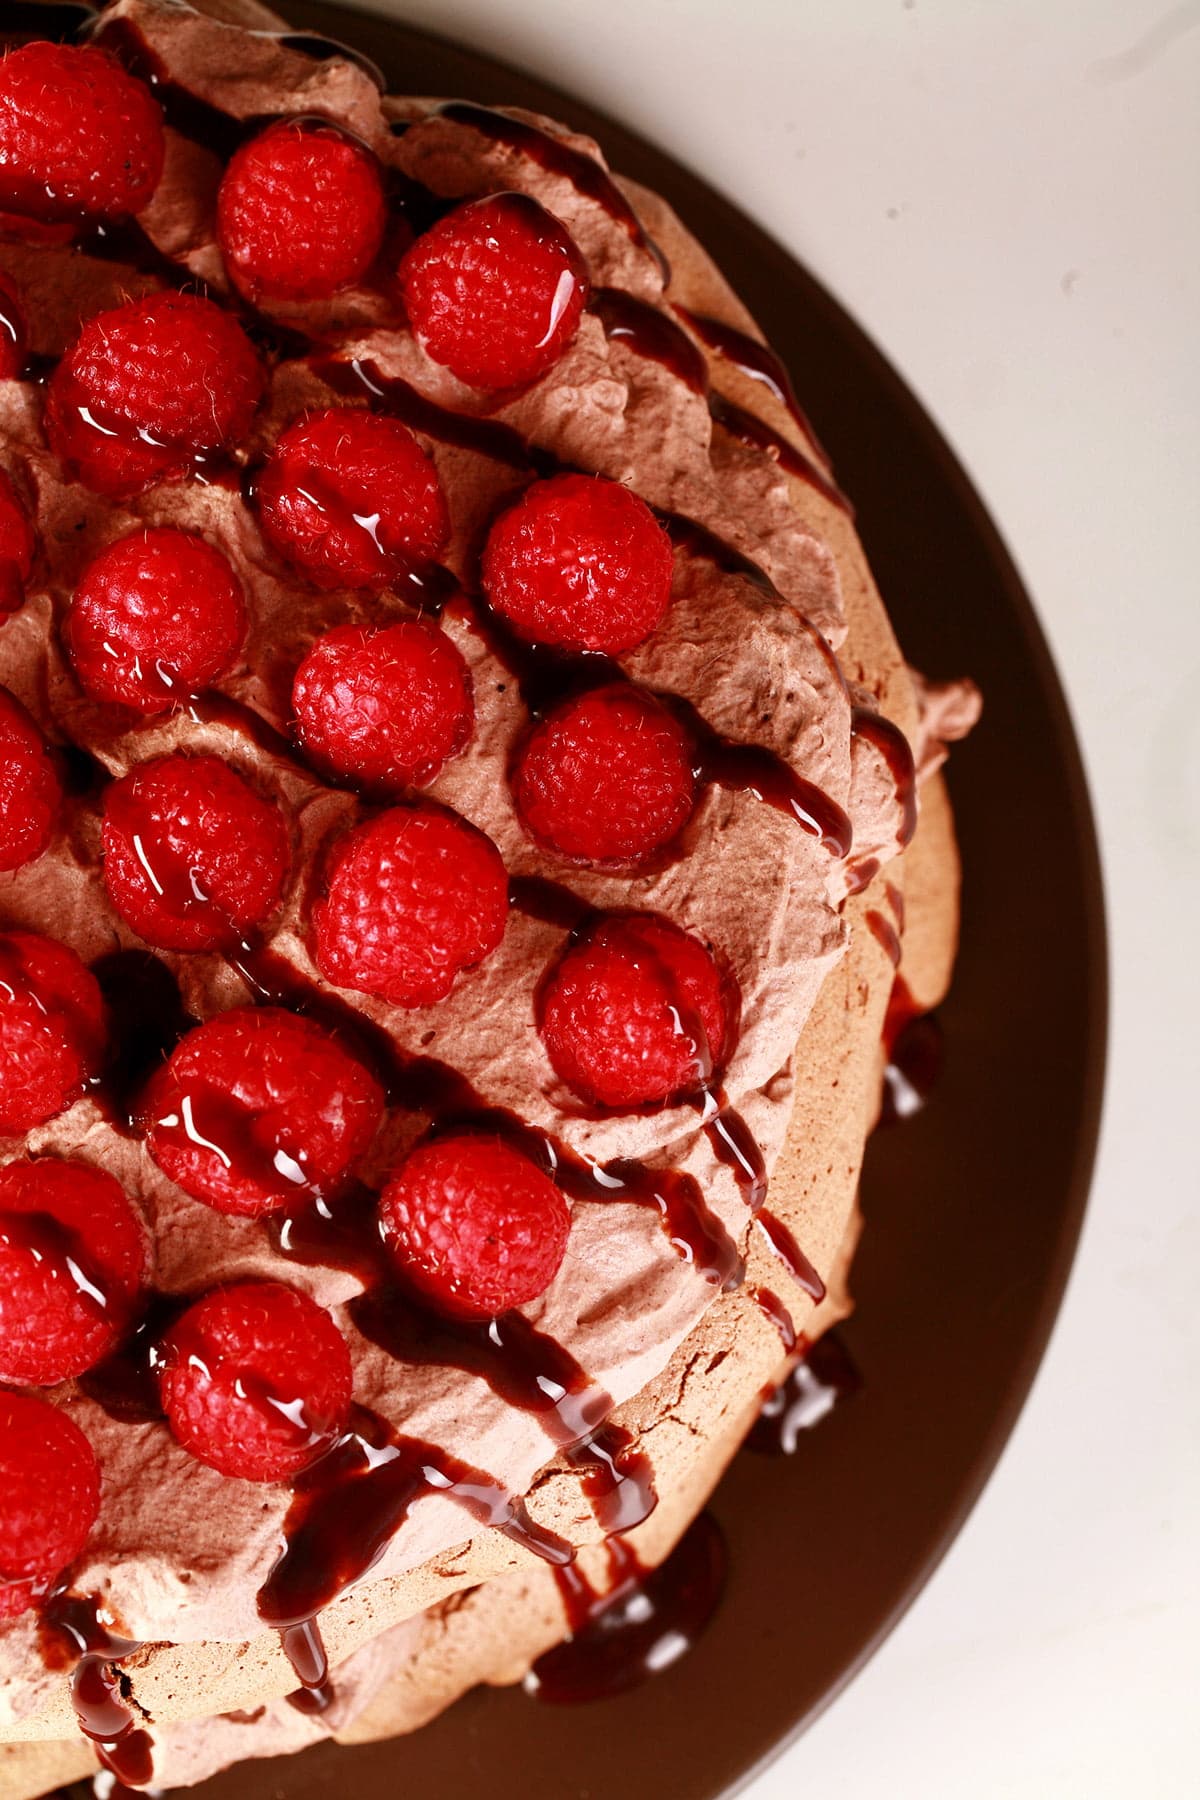 A double layered chocolate pavlova on a brown plate. Two layers of chocolate meringue are sandwiches with layers of chocolate whipped cream and raspberries, drizzled with chocolate sauce.